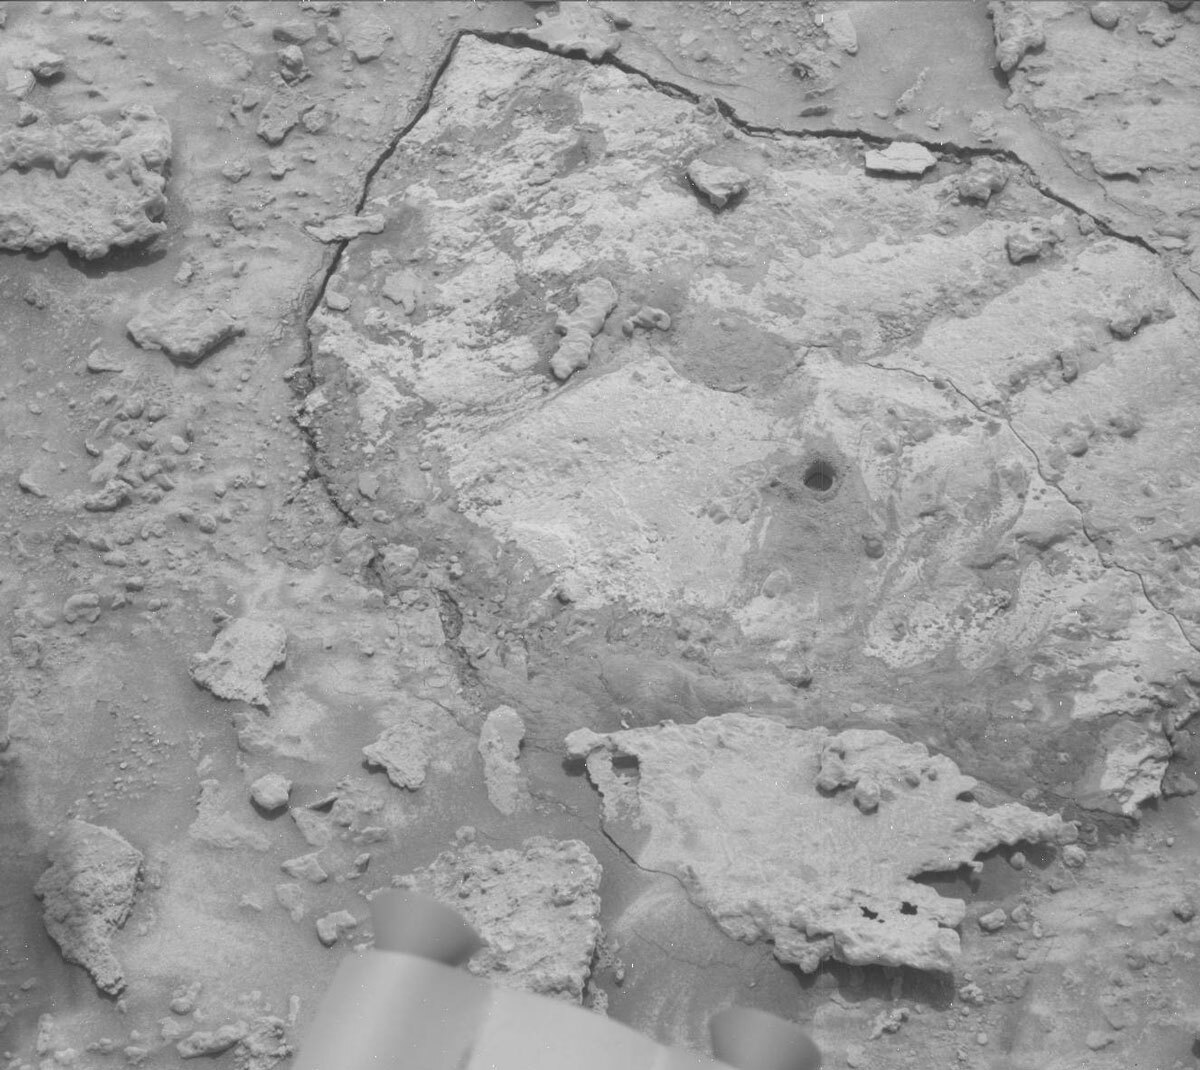 This image was taken by Mast Camera (Mastcam) onboard NASA's Mars rover Curiosity on Sol 3682.